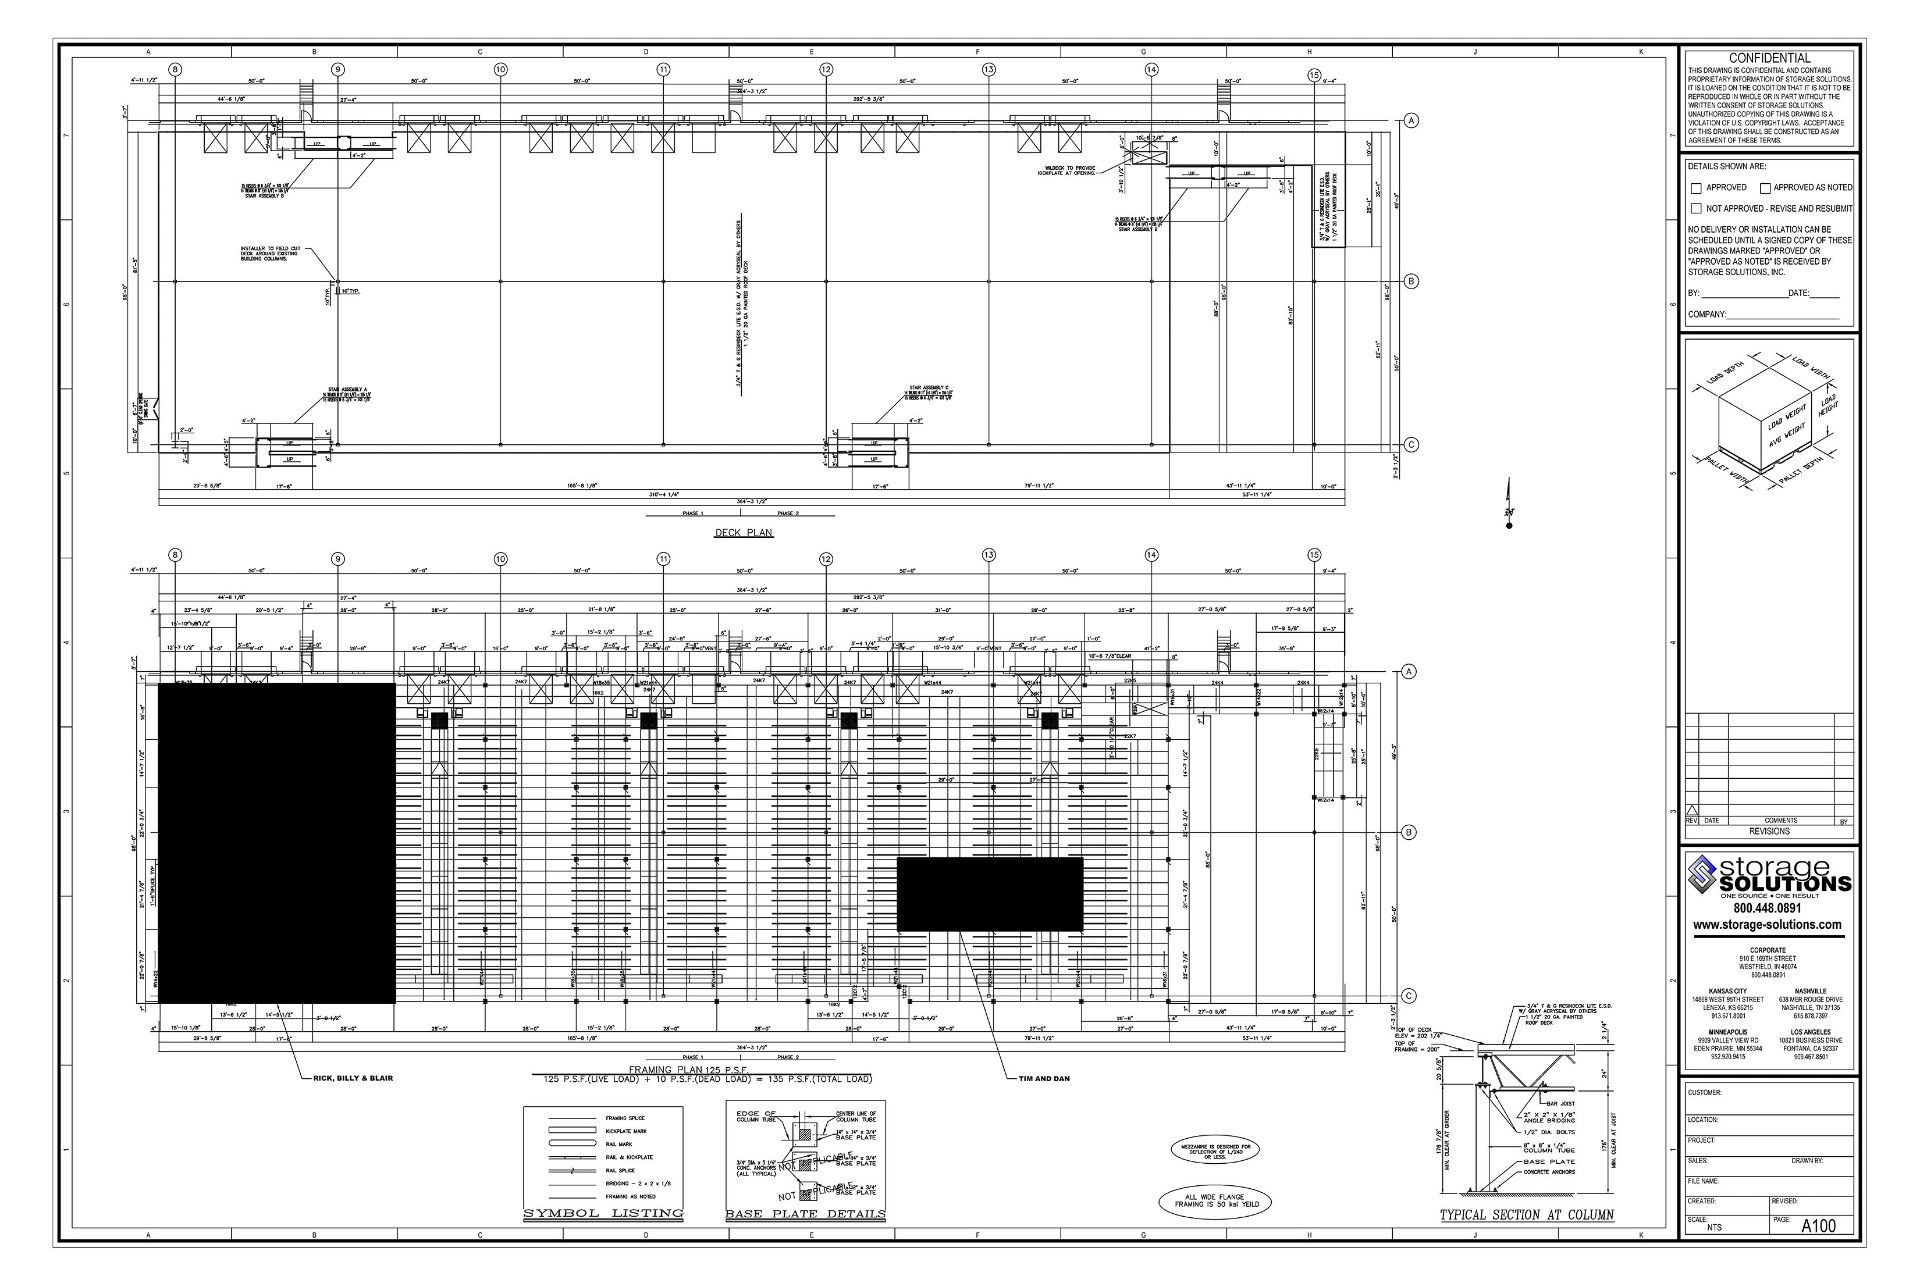 MEZZANINE = TOP OF DECK: 202 1/4'', CLEAR HEIGHT: 167 7/8'', APPROXIMATE ORIGINAL SIZE: 99'3'' X - Image 9 of 9